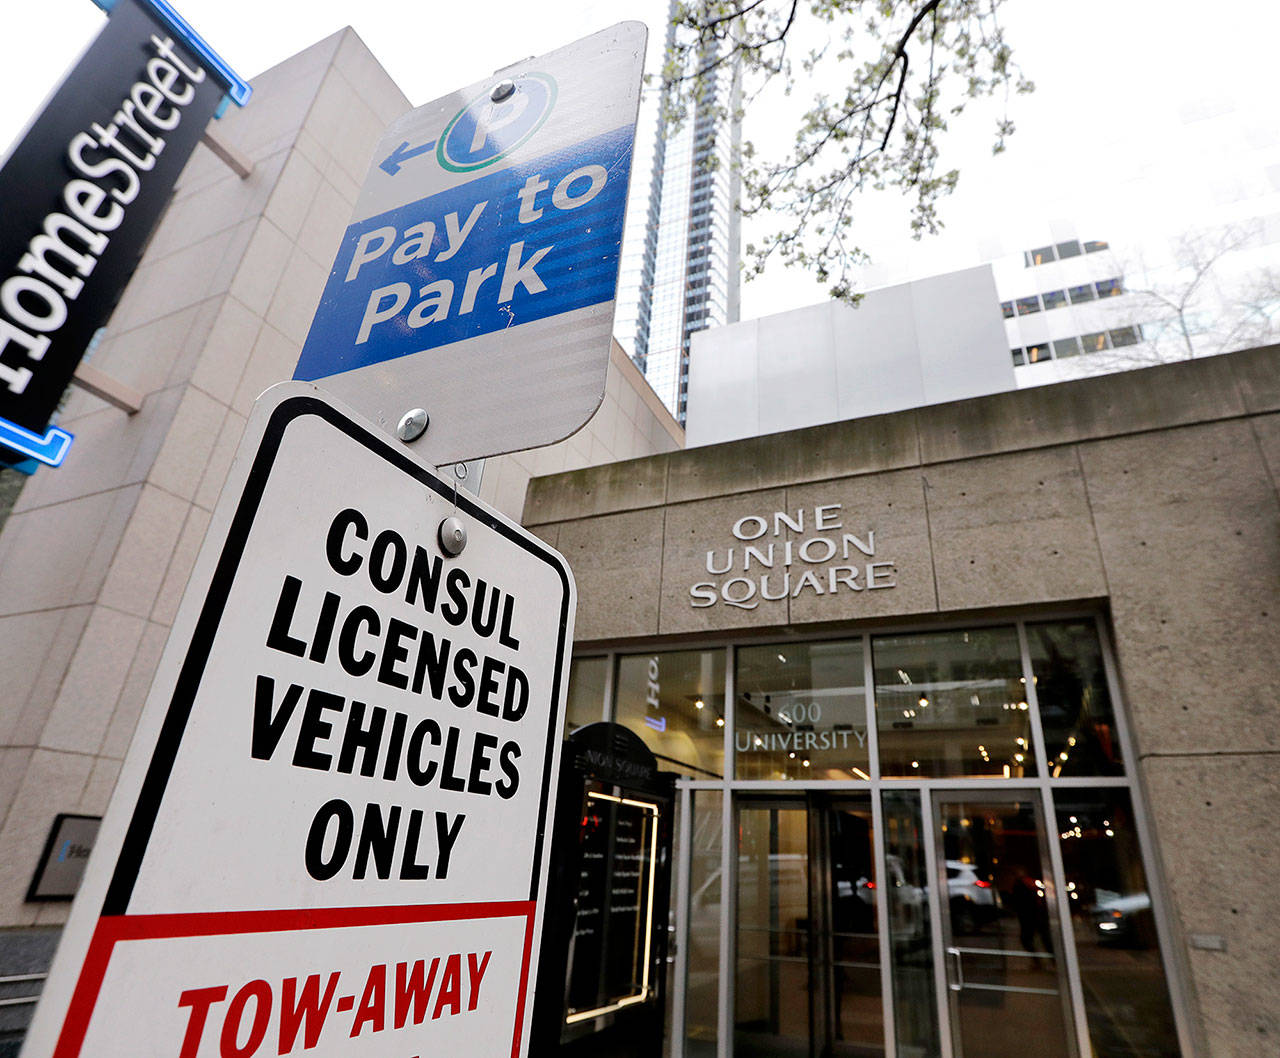 Parking for consul vehicles is reserved outside One Union Square, the downtown Seattle building that houses the Russian consulate in Seattle. (AP Photo/Elaine Thompson)